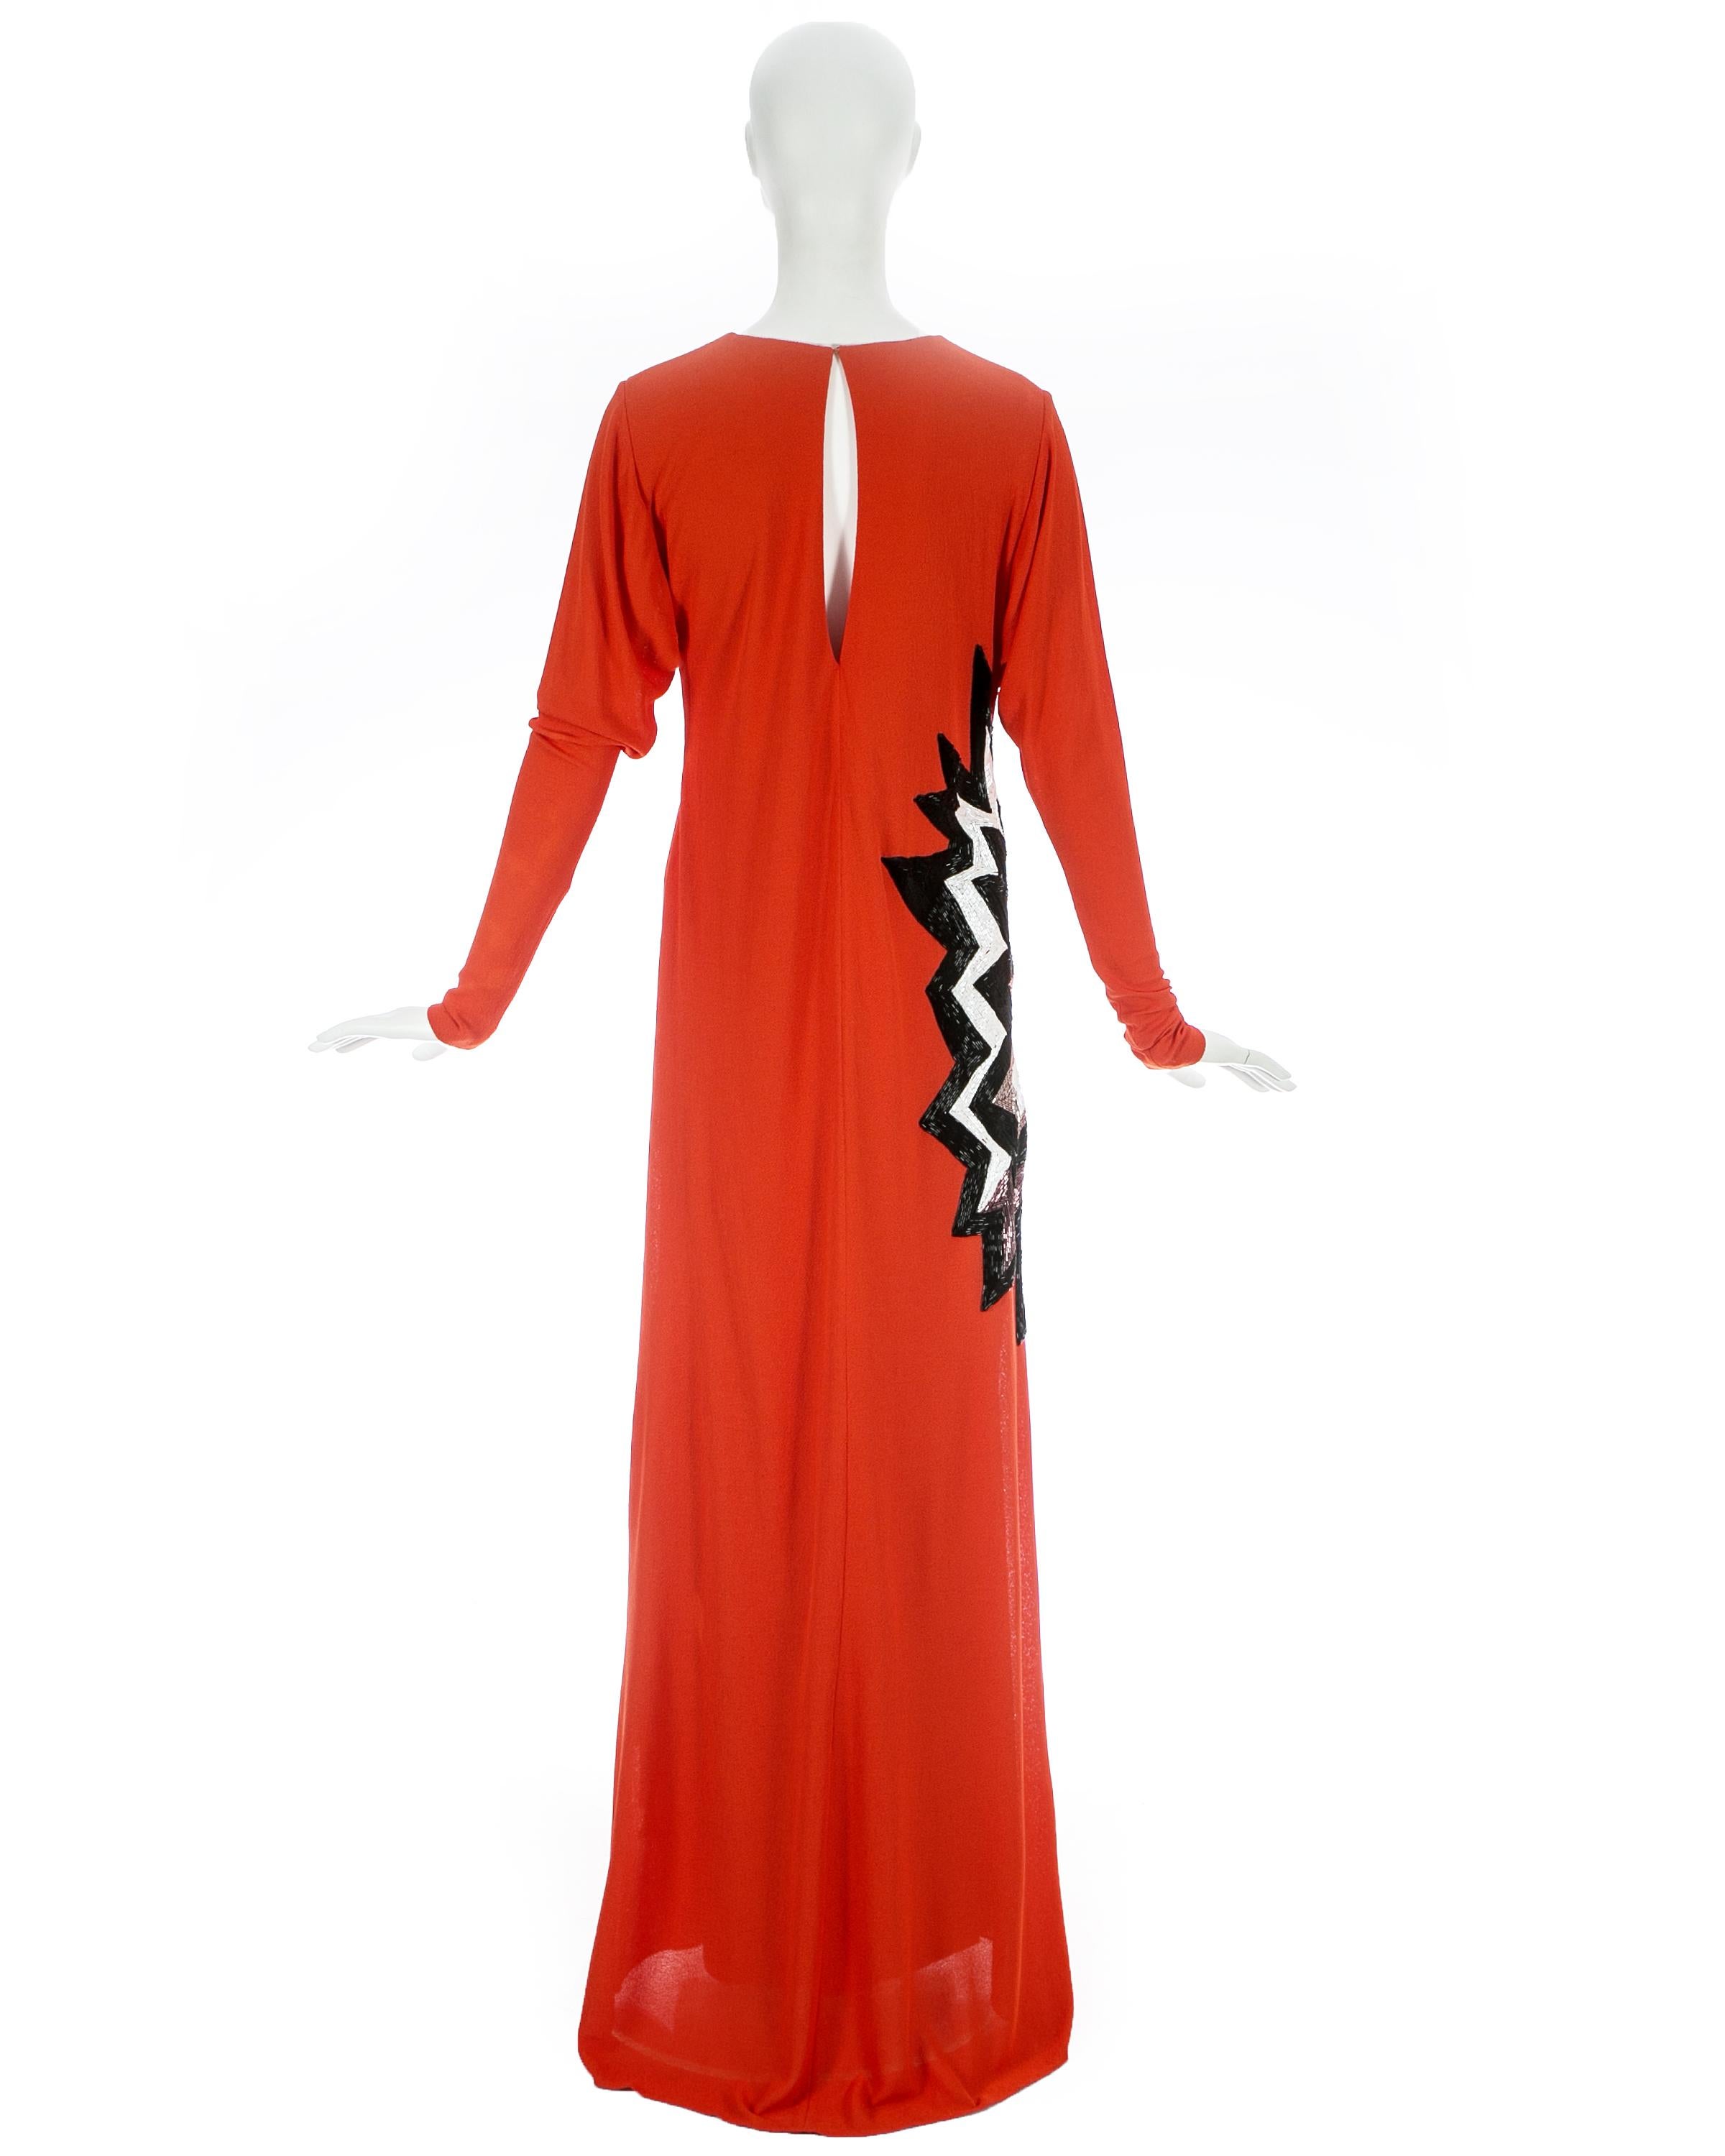 Tom Ford coral viscose crepe beaded evening dress with train, fw 2013 For Sale 4